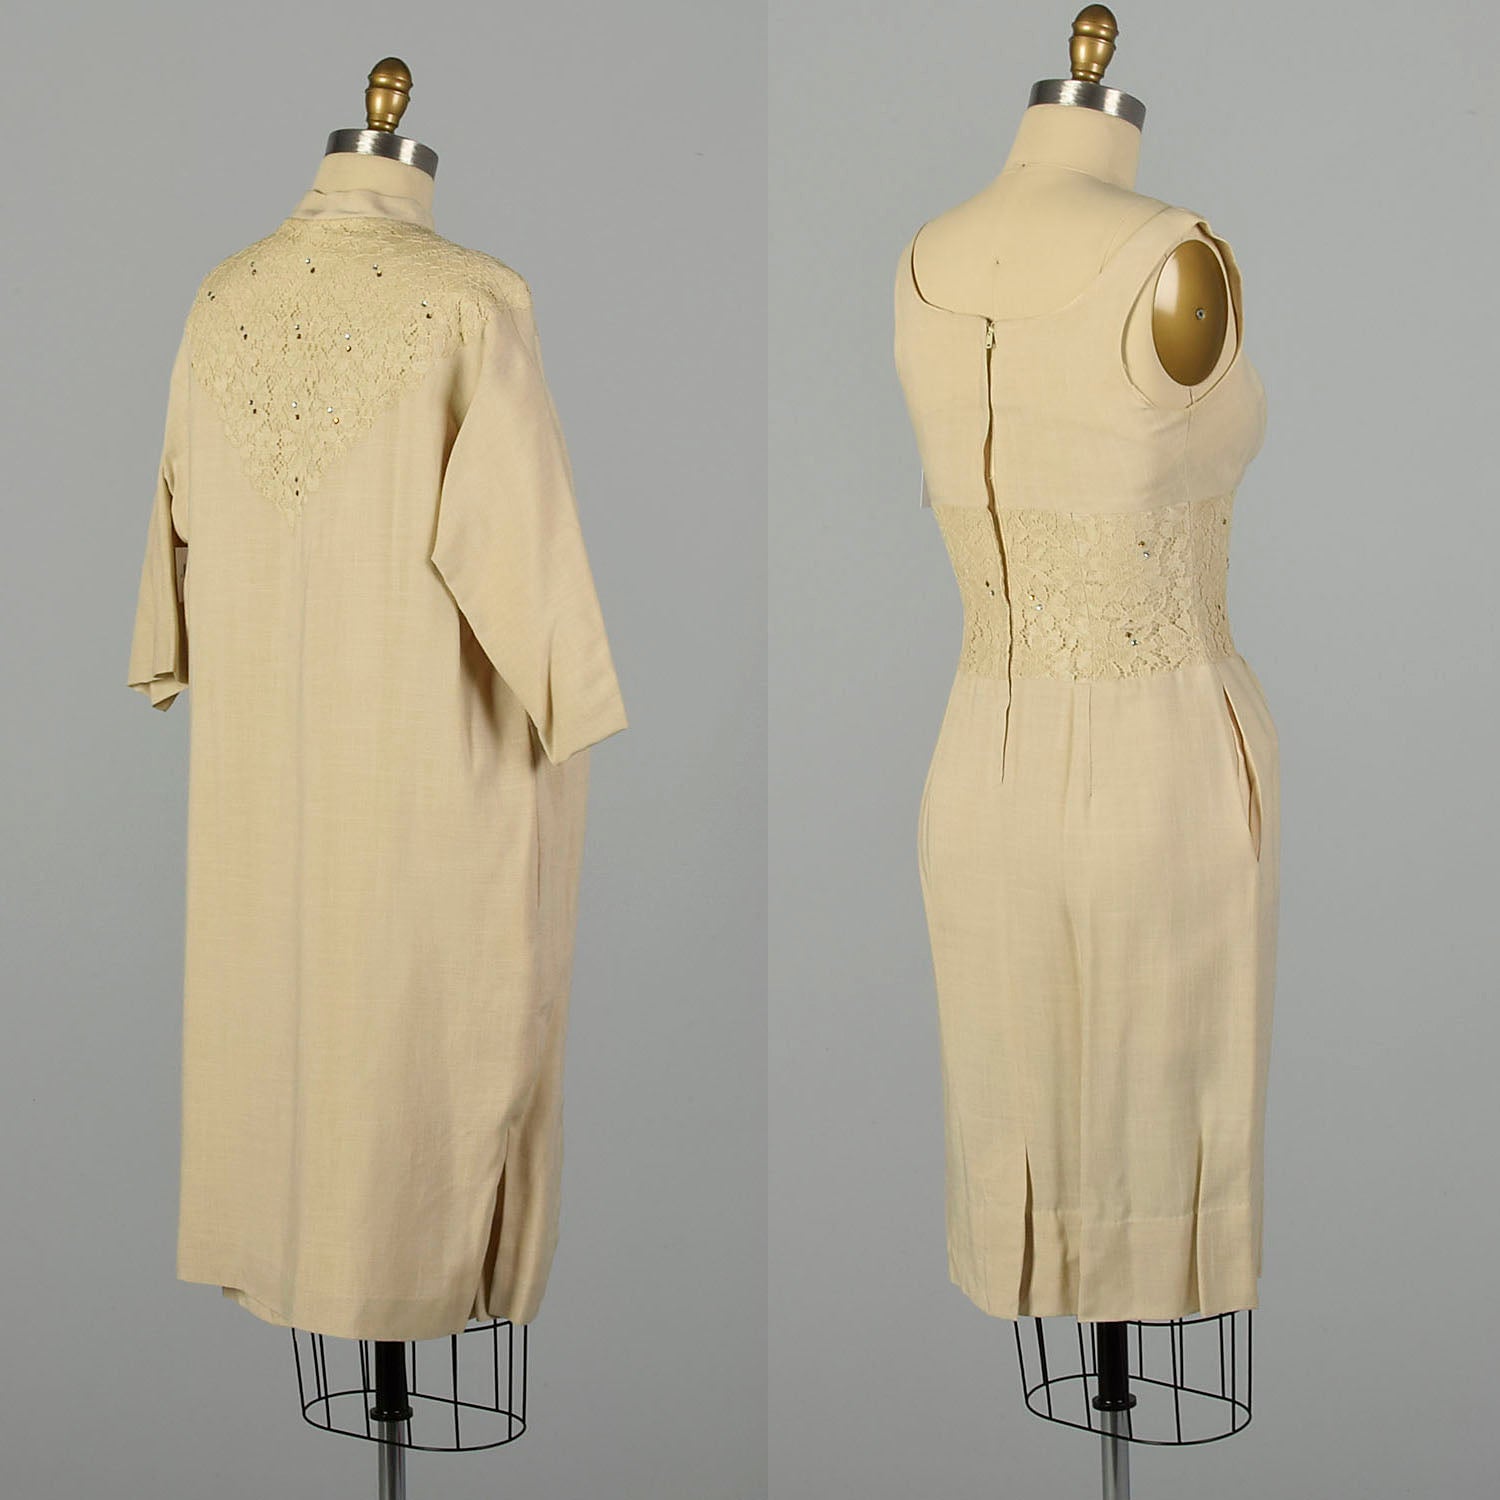 Small 1950s Linen-Look Dress and Jacket Set Wiggle Dress